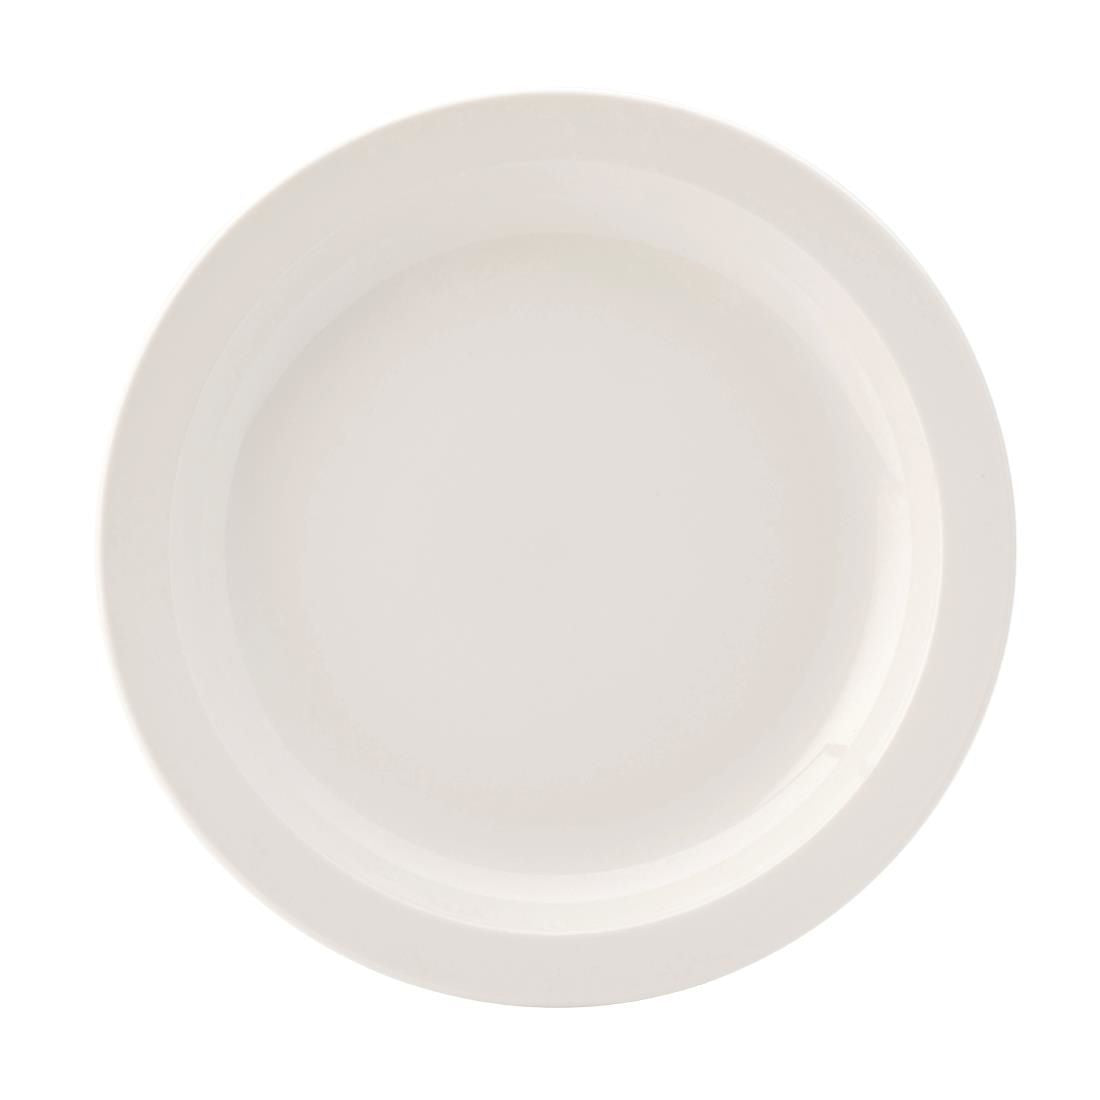 DB612 Utopia Pure White Narrow Rim Plates 254mm (Pack of 18) JD Catering Equipment Solutions Ltd